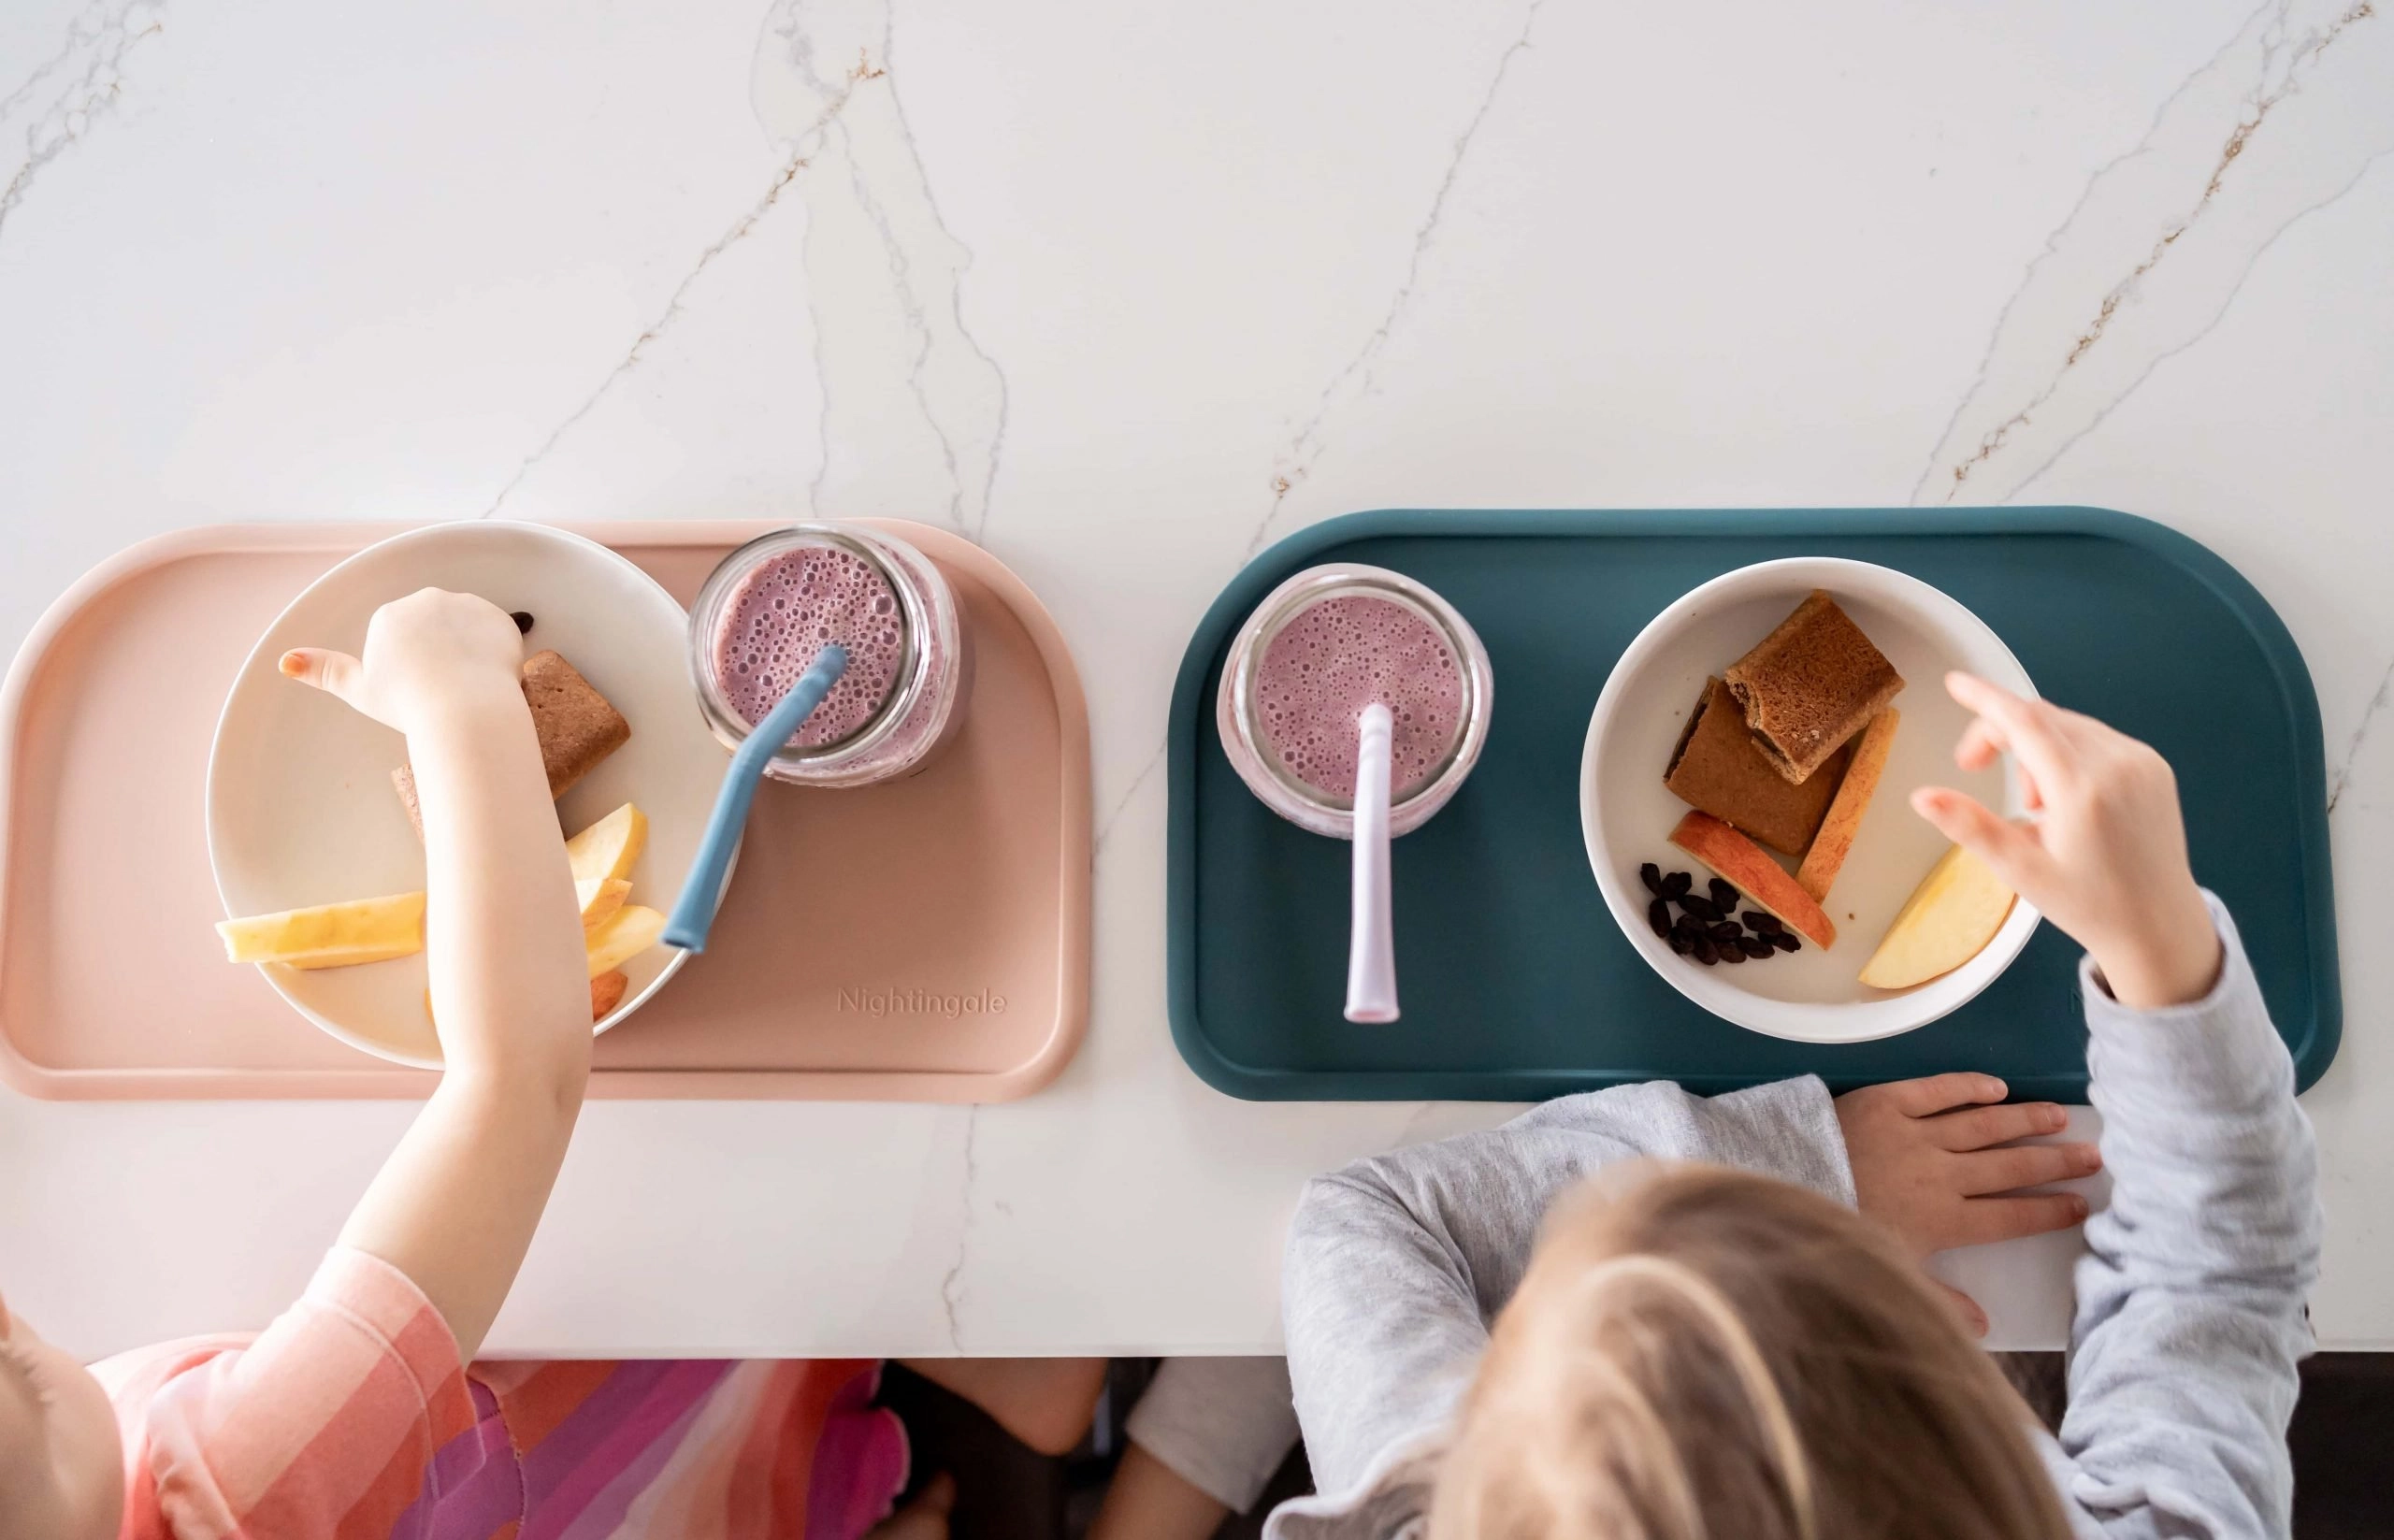 Silicone placemat for kids to help protect the table surface.